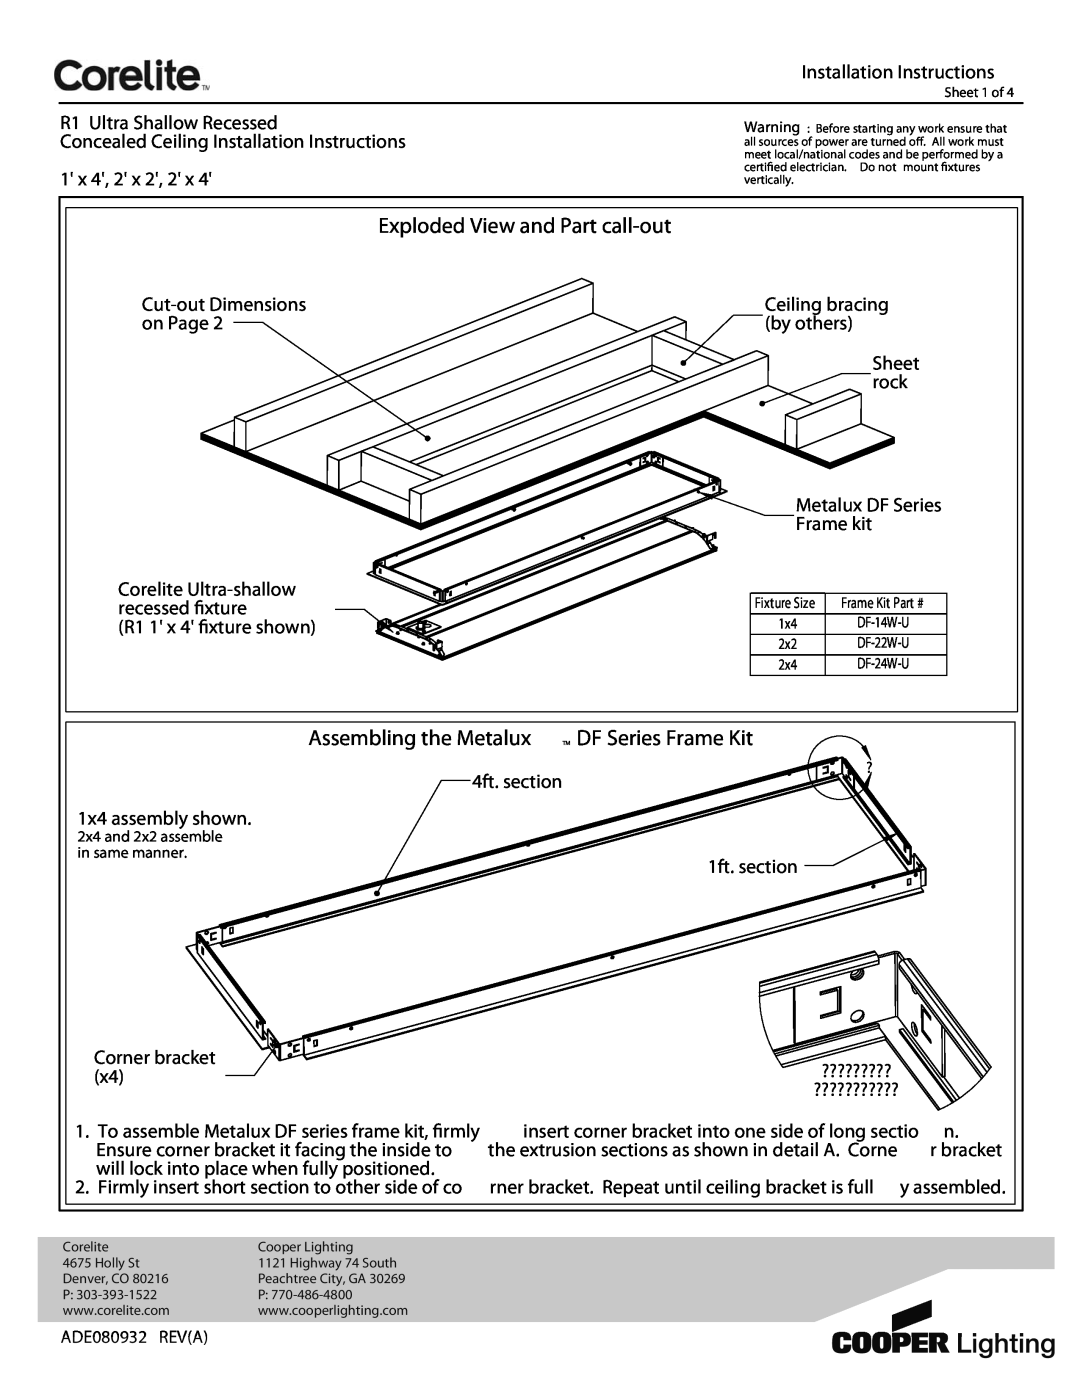 Cooper Lighting ADE080932 installation instructions Exploded View and Part call-out, Installation Instructions, r bracket 